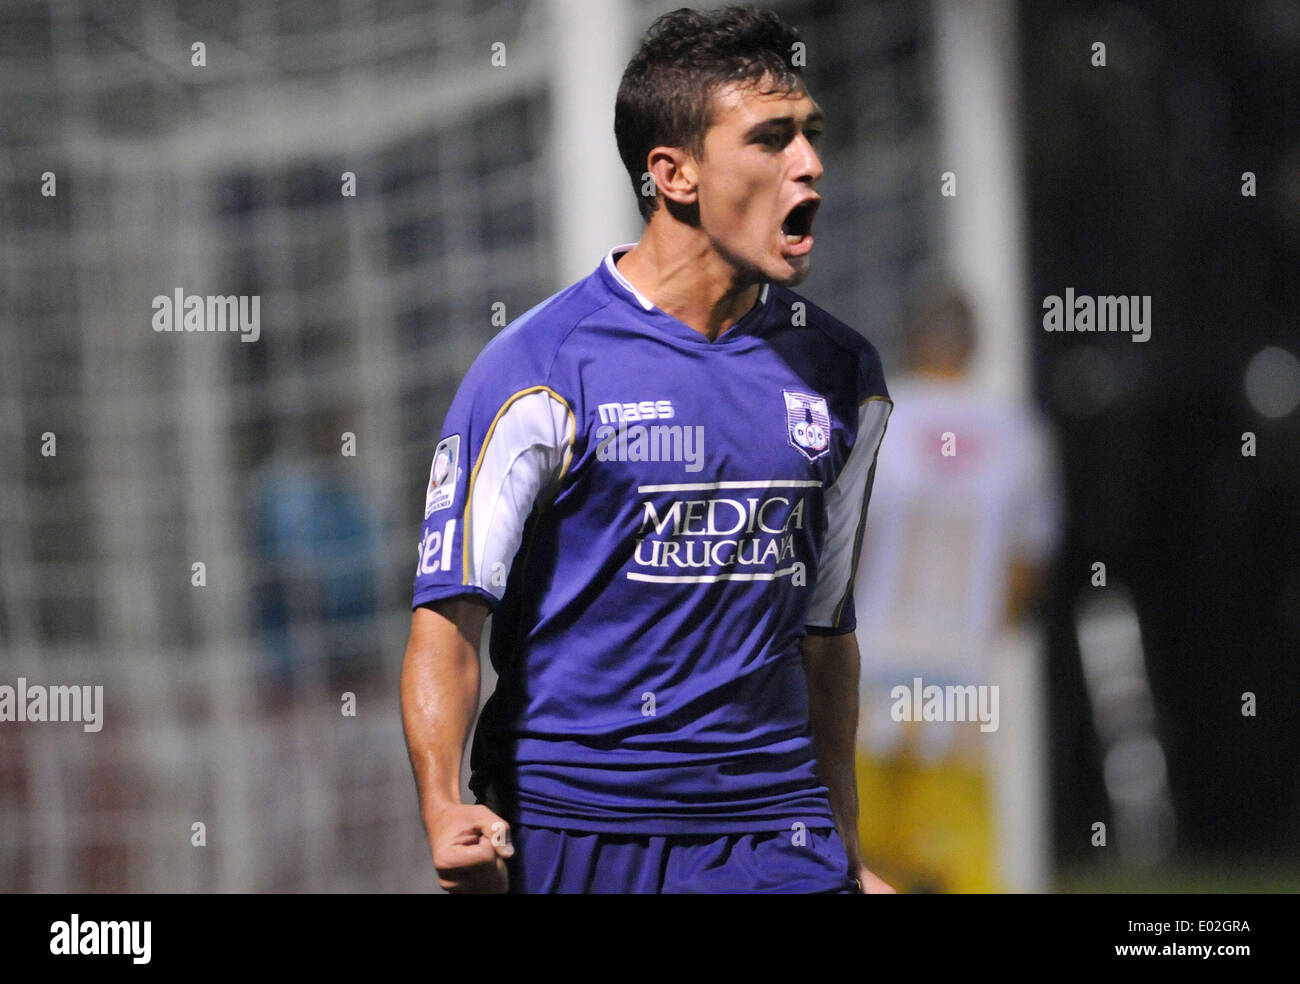 Montevideo, Uruguay. 29th Apr, 2014. Giorgian De Arrascaeta of Uruguay's Defensor Sporting celebrates scoring against Bolivia's the Strongest during the knockout stage match of Libertadores Cup held at Luis Franzini Stadium in Motevideo, Uruguay, on April 29, 2014. © Nicolas Celaya/Xinhua/Alamy Live News Stock Photo